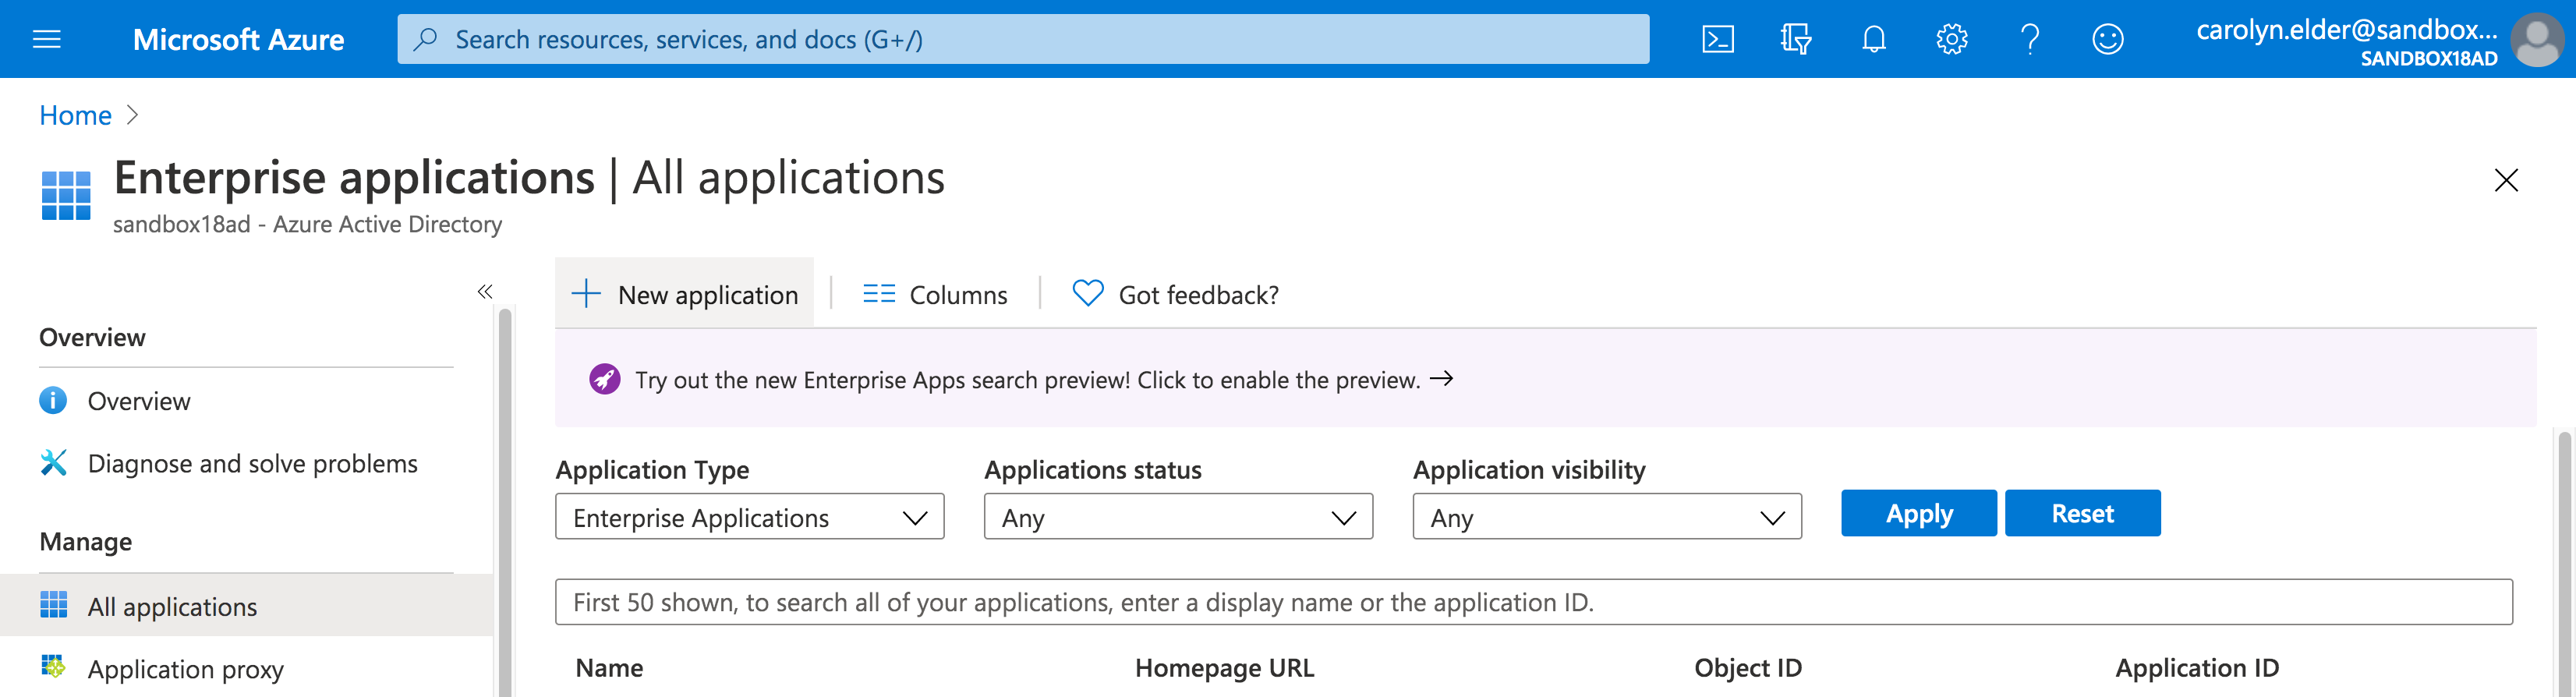 0_Select__New_application_to_create_a_new_enterprise_application_in_Microsoft_365___Tethr_customer_support.png